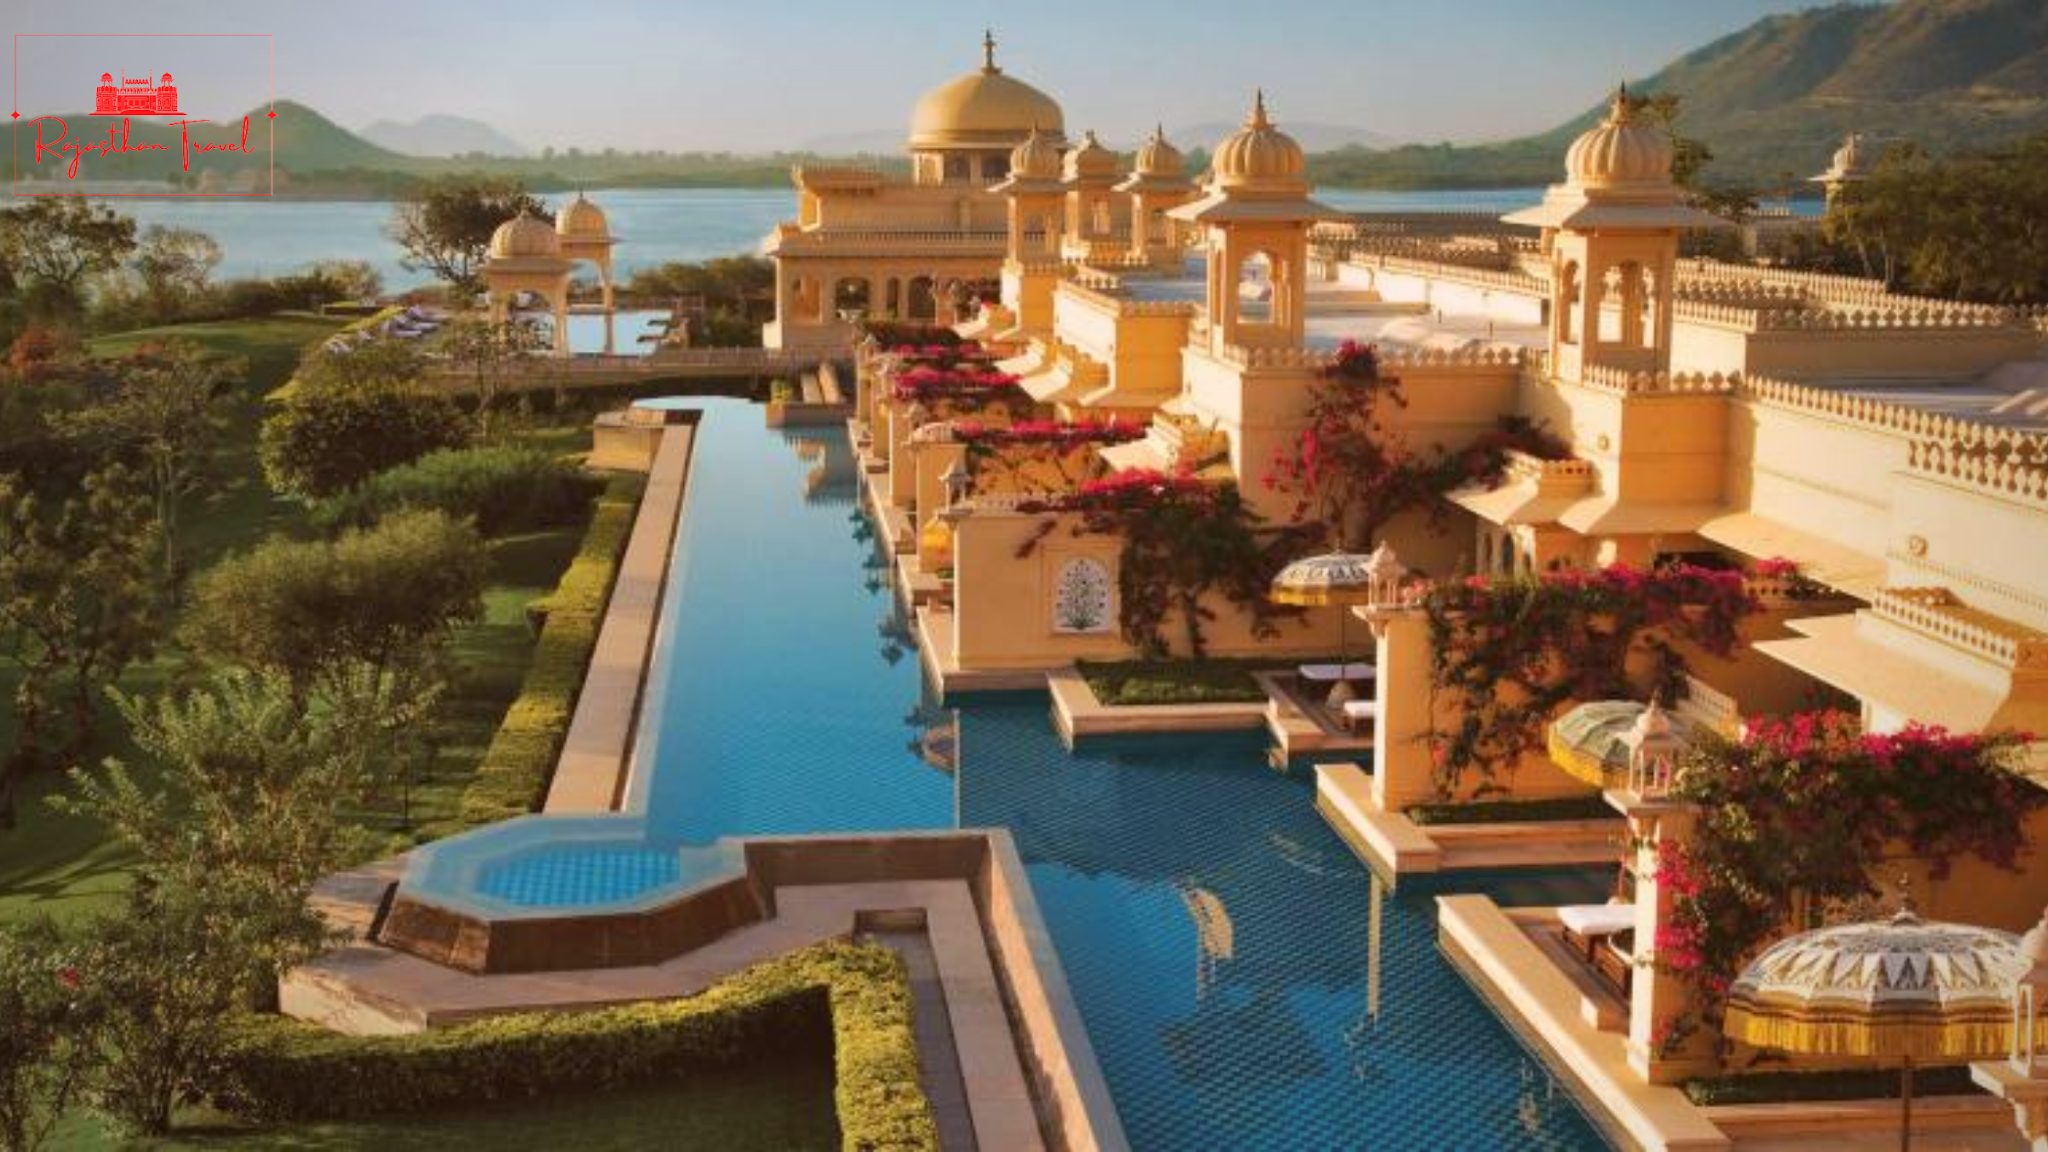 5 Star Hotels to Stay in Jaipur, Rajasthan